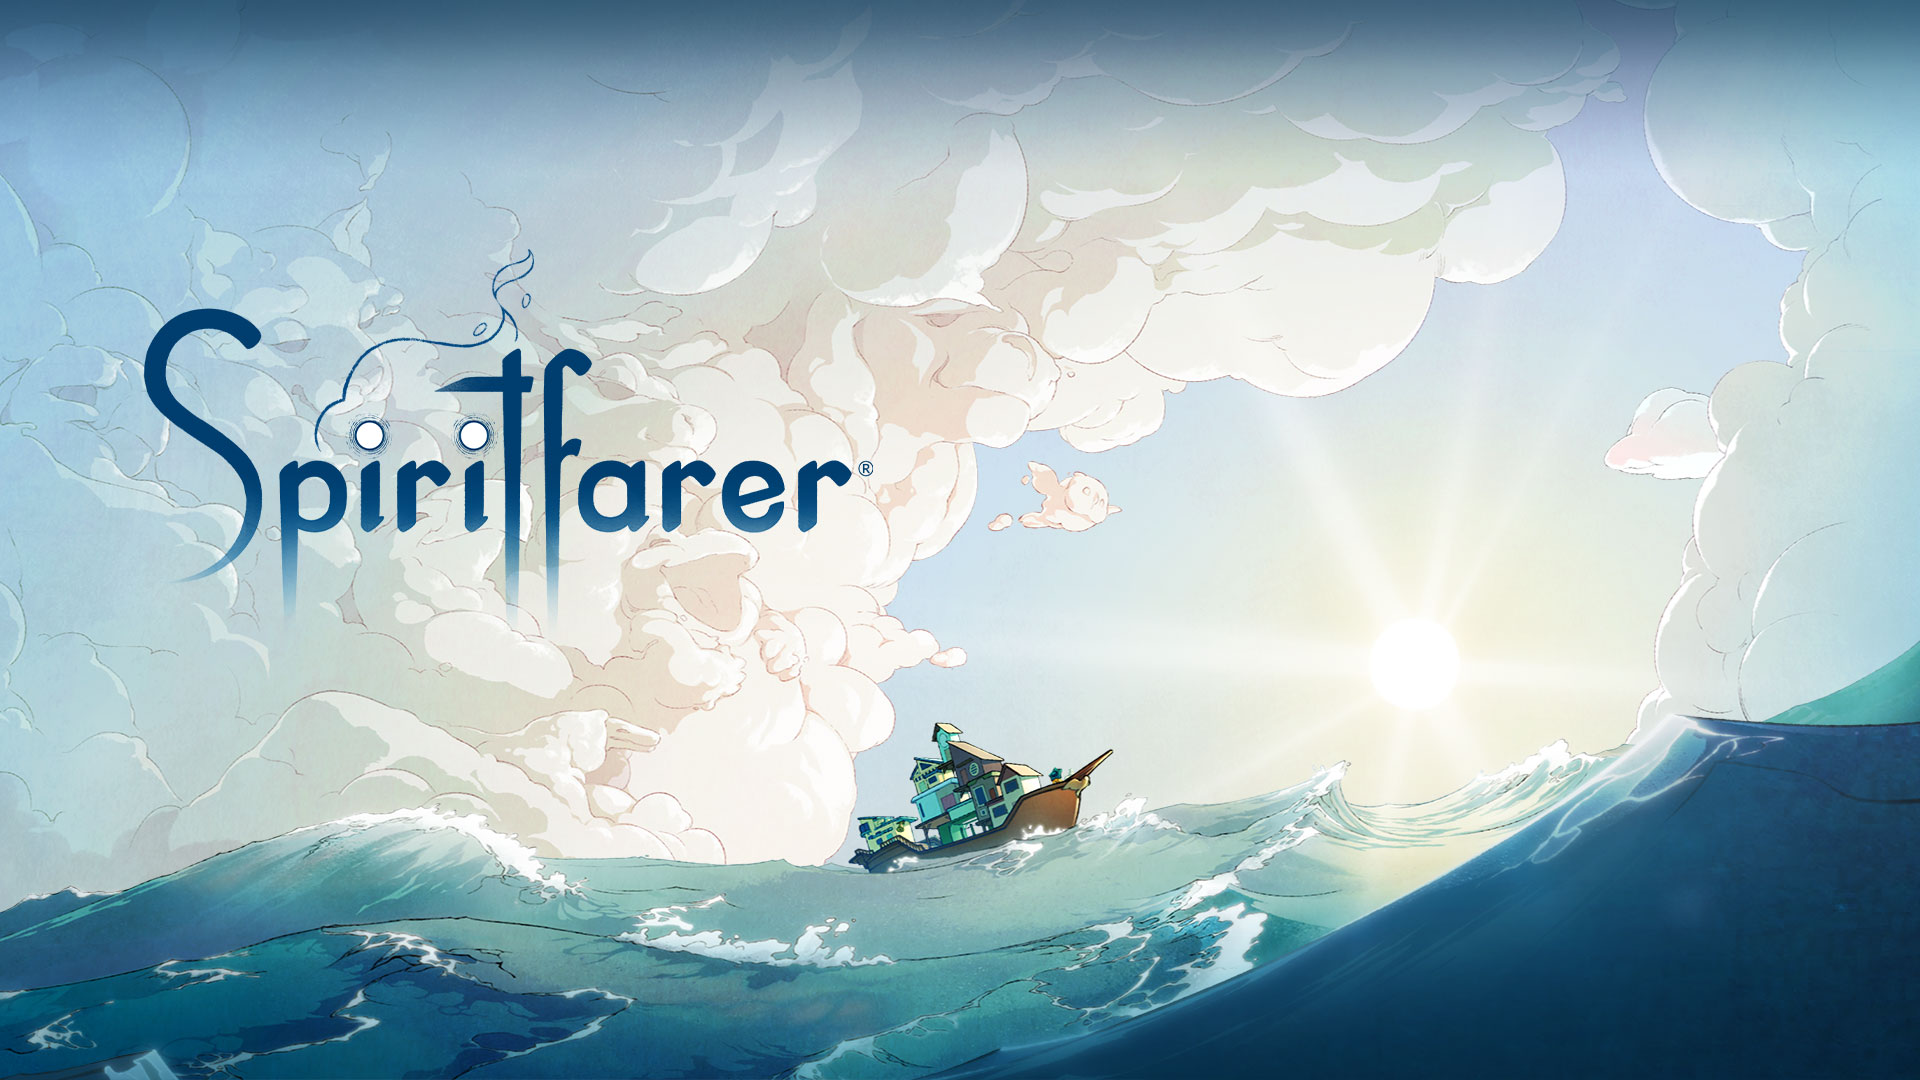 Spiritfarer logo, boat on the water with clouds forming different animals